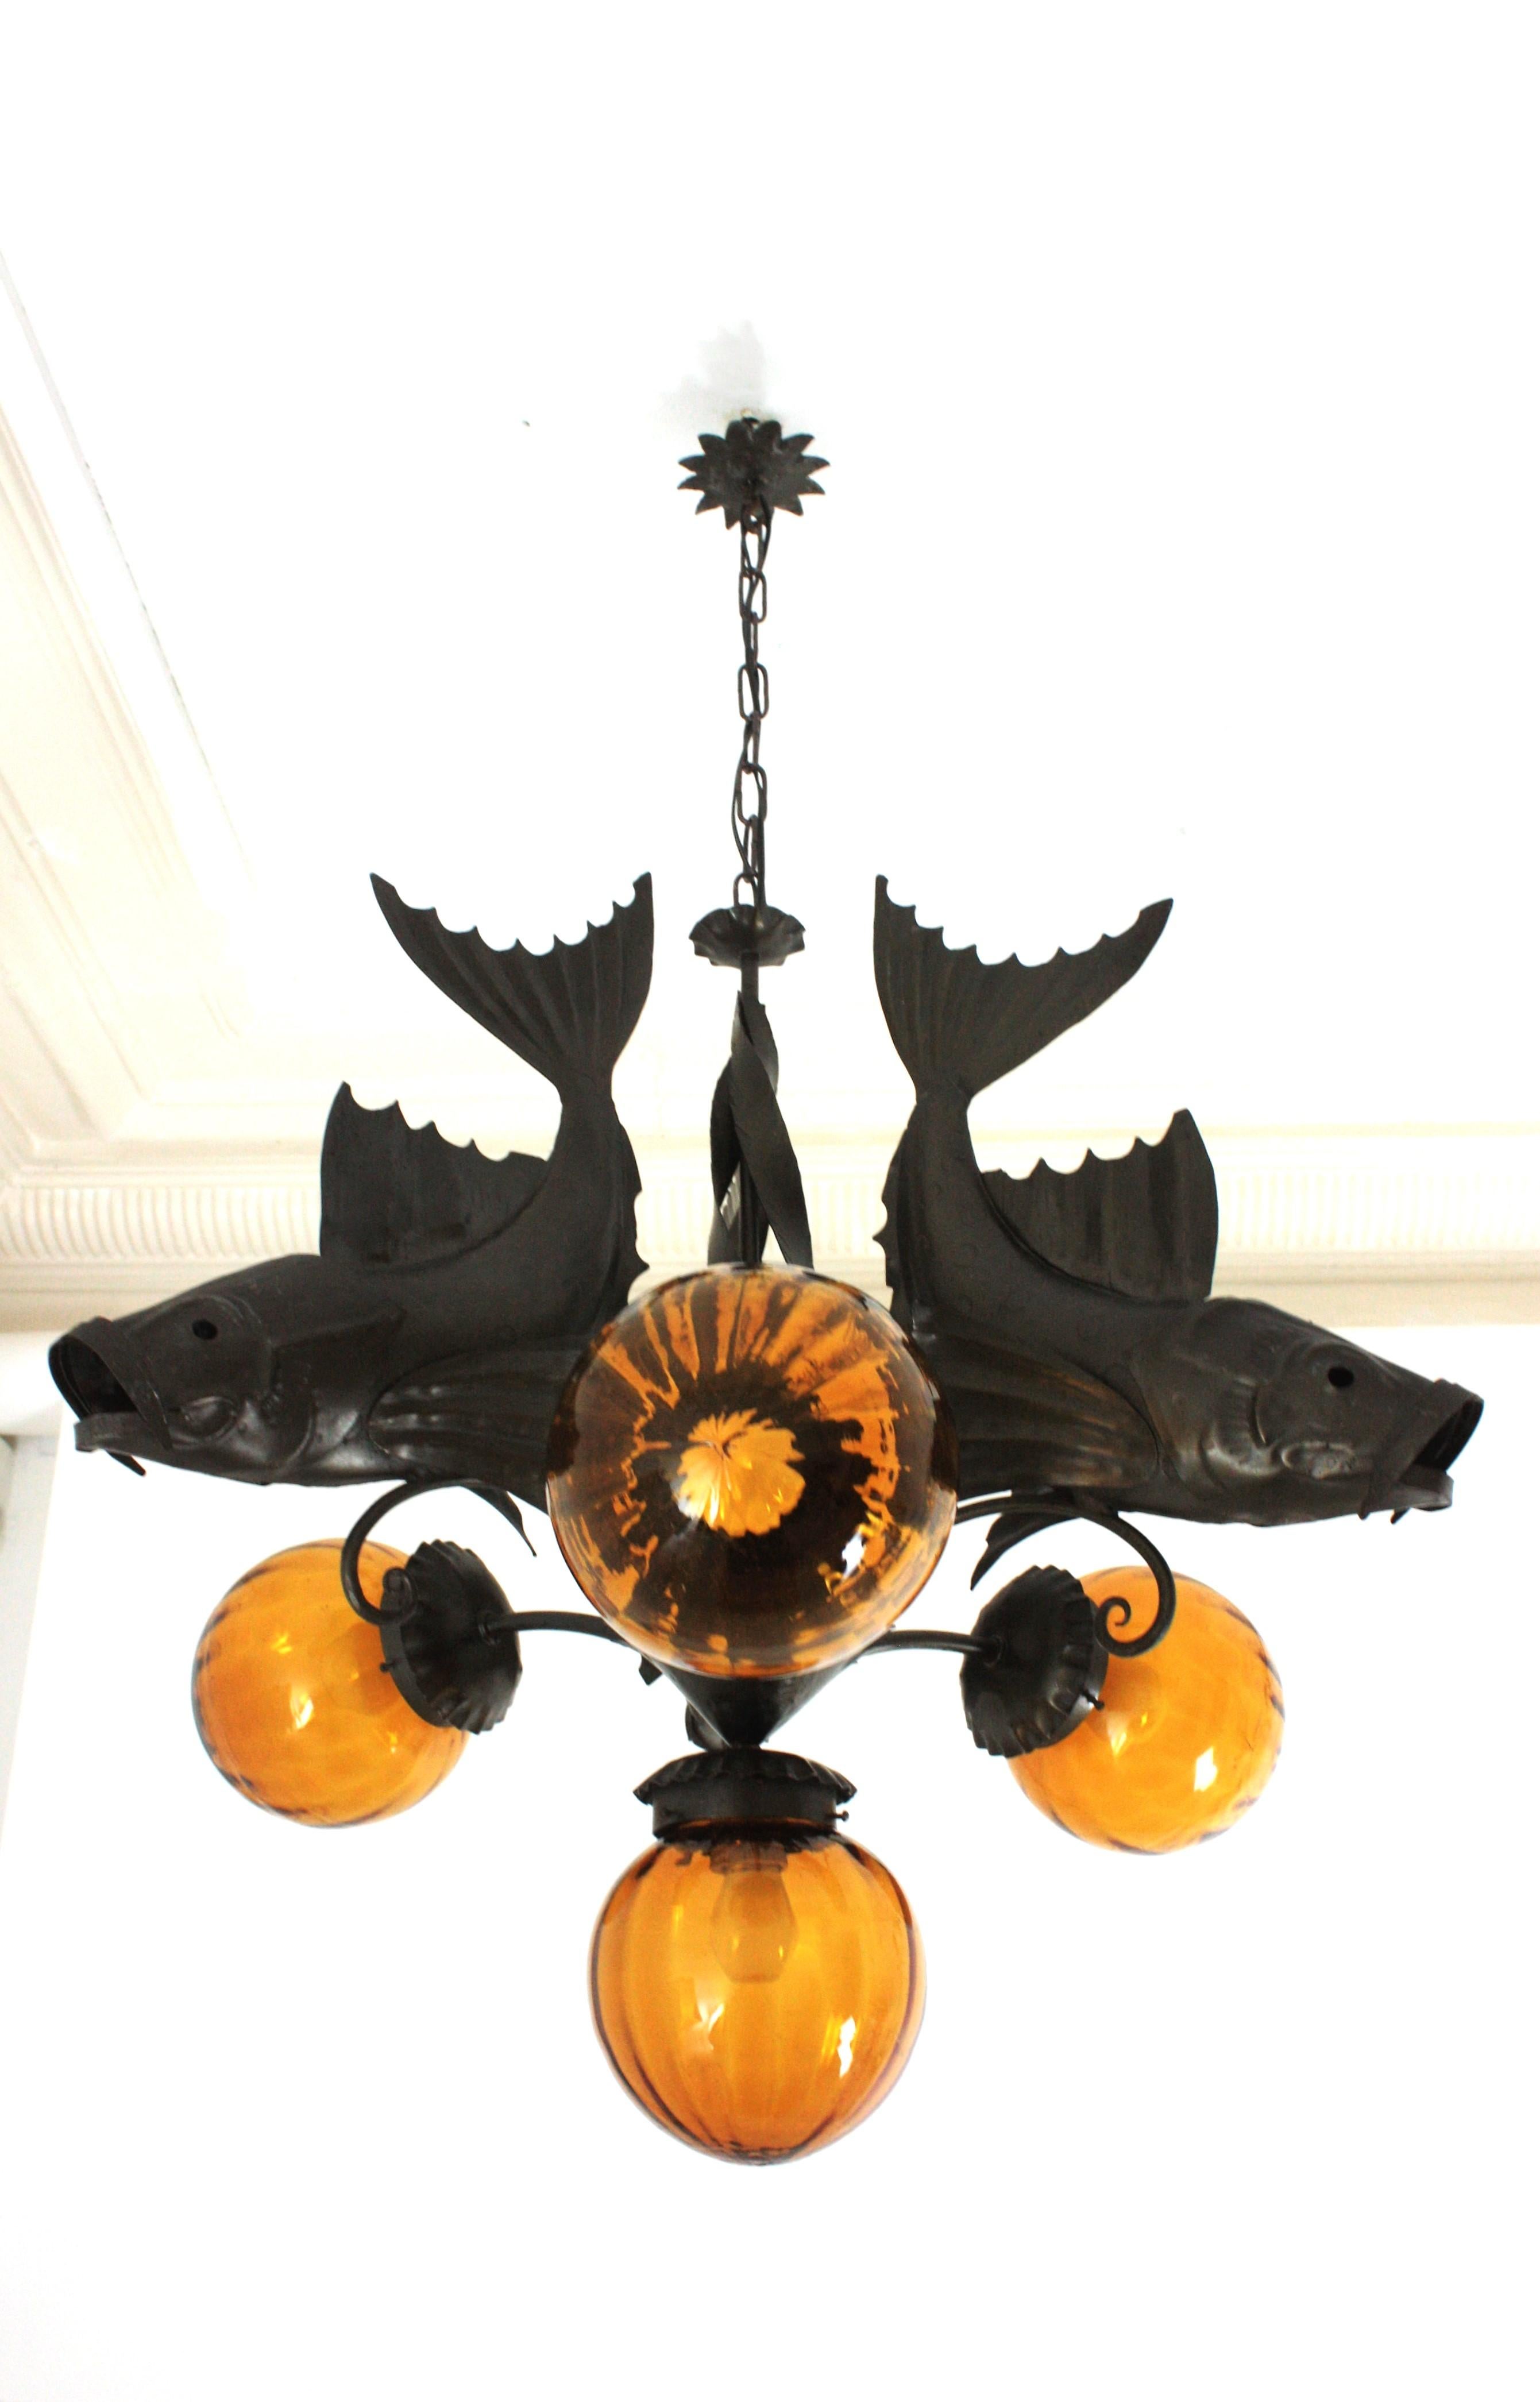 Hammered Spanish Wrought Iron and Amber Glass Chandelier, Fish Design For Sale